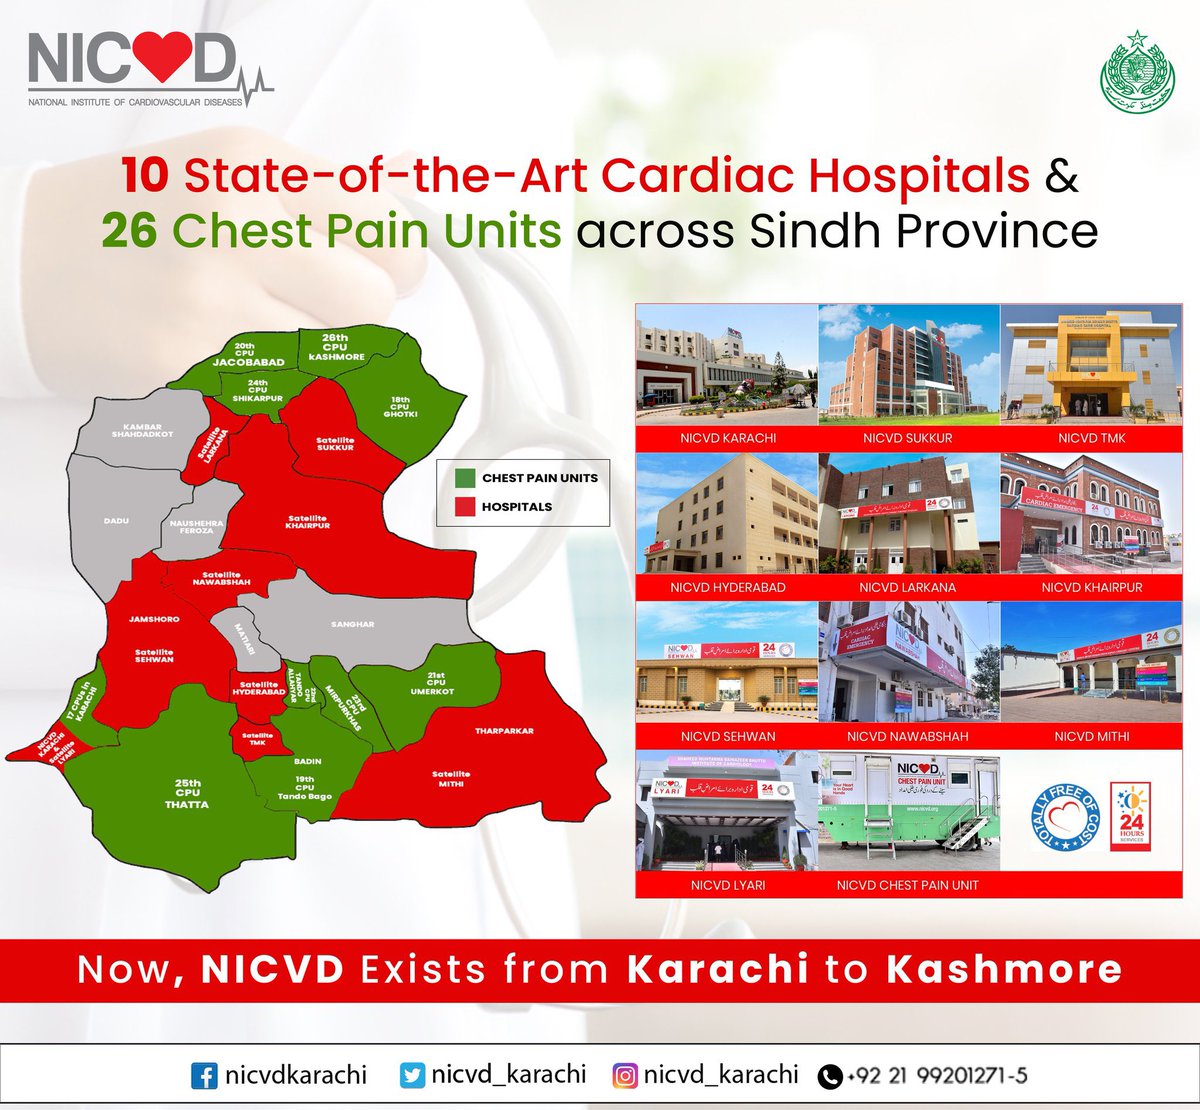 🌍 #NICVD: The World’s Largest Cardiac Care Network! 🏥💙
NICVD has become the largest provider of free cardiac treatment globally.
Credit Goes To Awami leader @BBhuttoZardari Sb✌️🇱🇾✌️
#HealthcareForAll #FreeOfCost